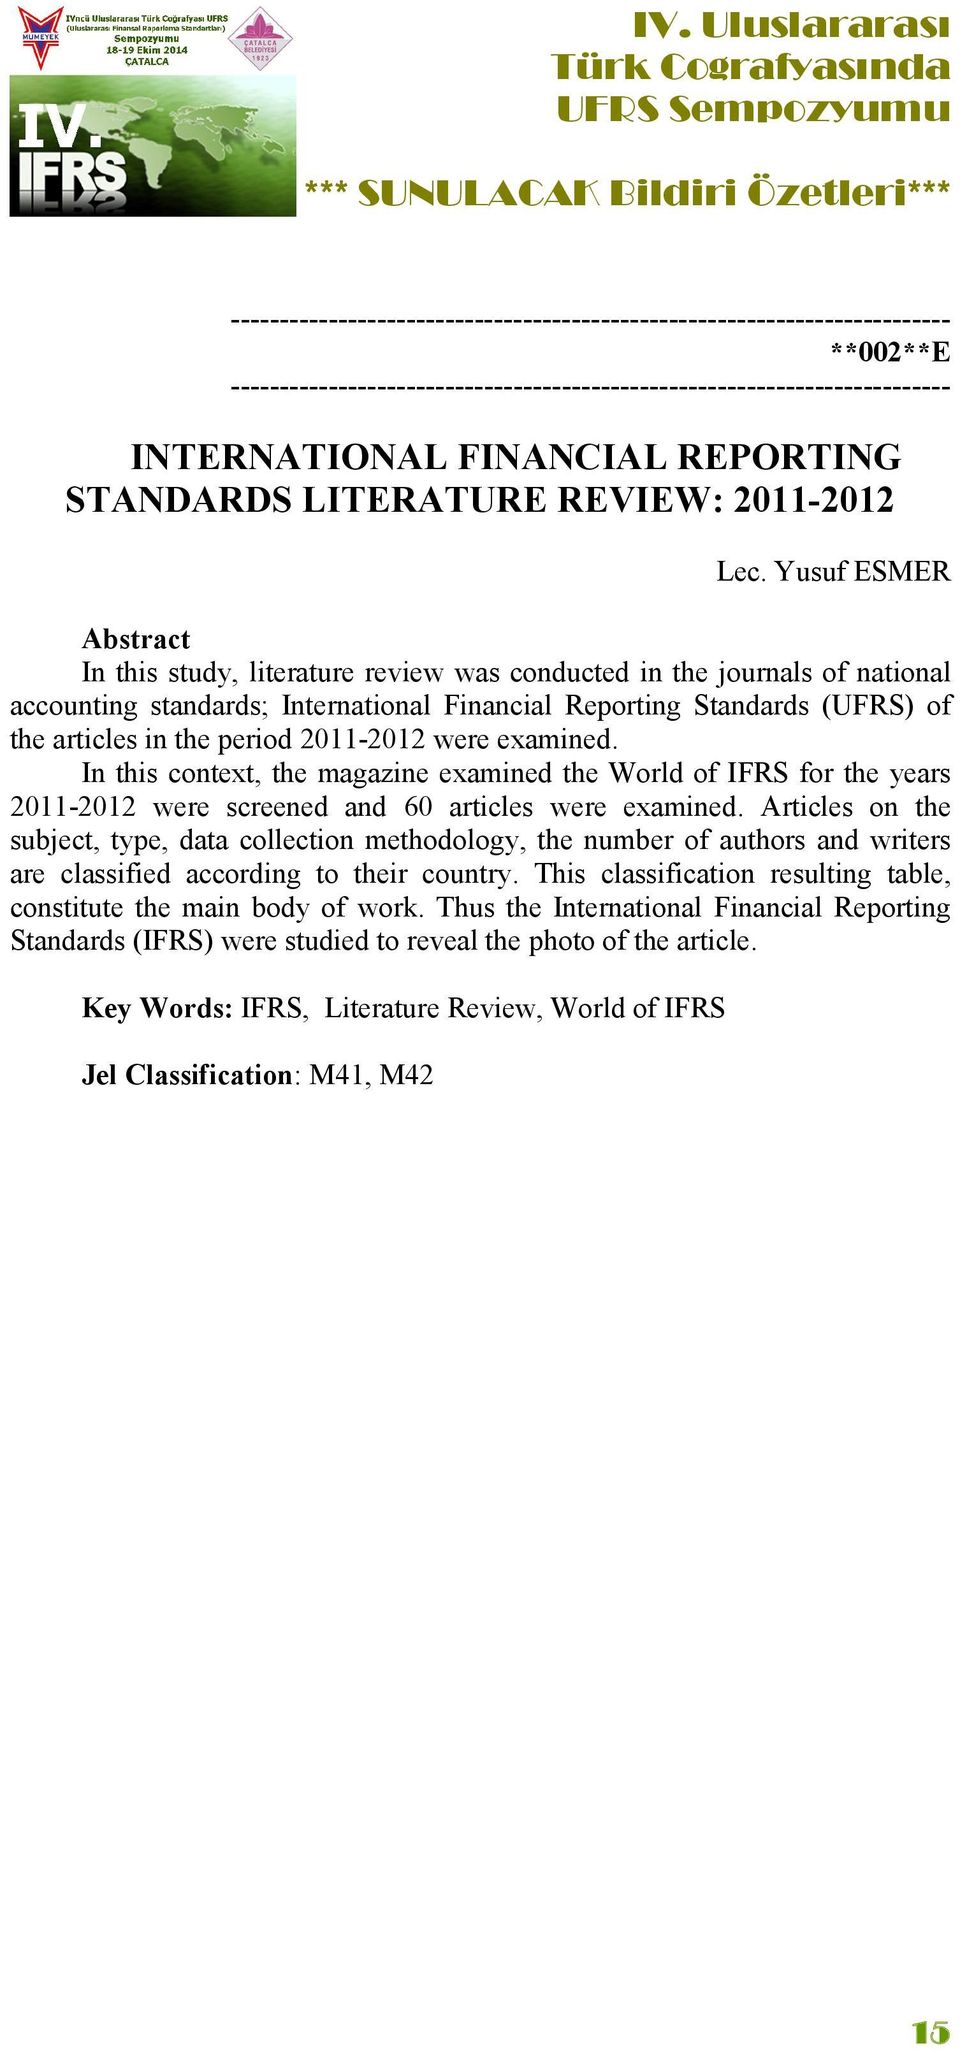 2011-2012 were examined. In this context, the magazine examined the World of IFRS for the years 2011-2012 were screened and 60 articles were examined.